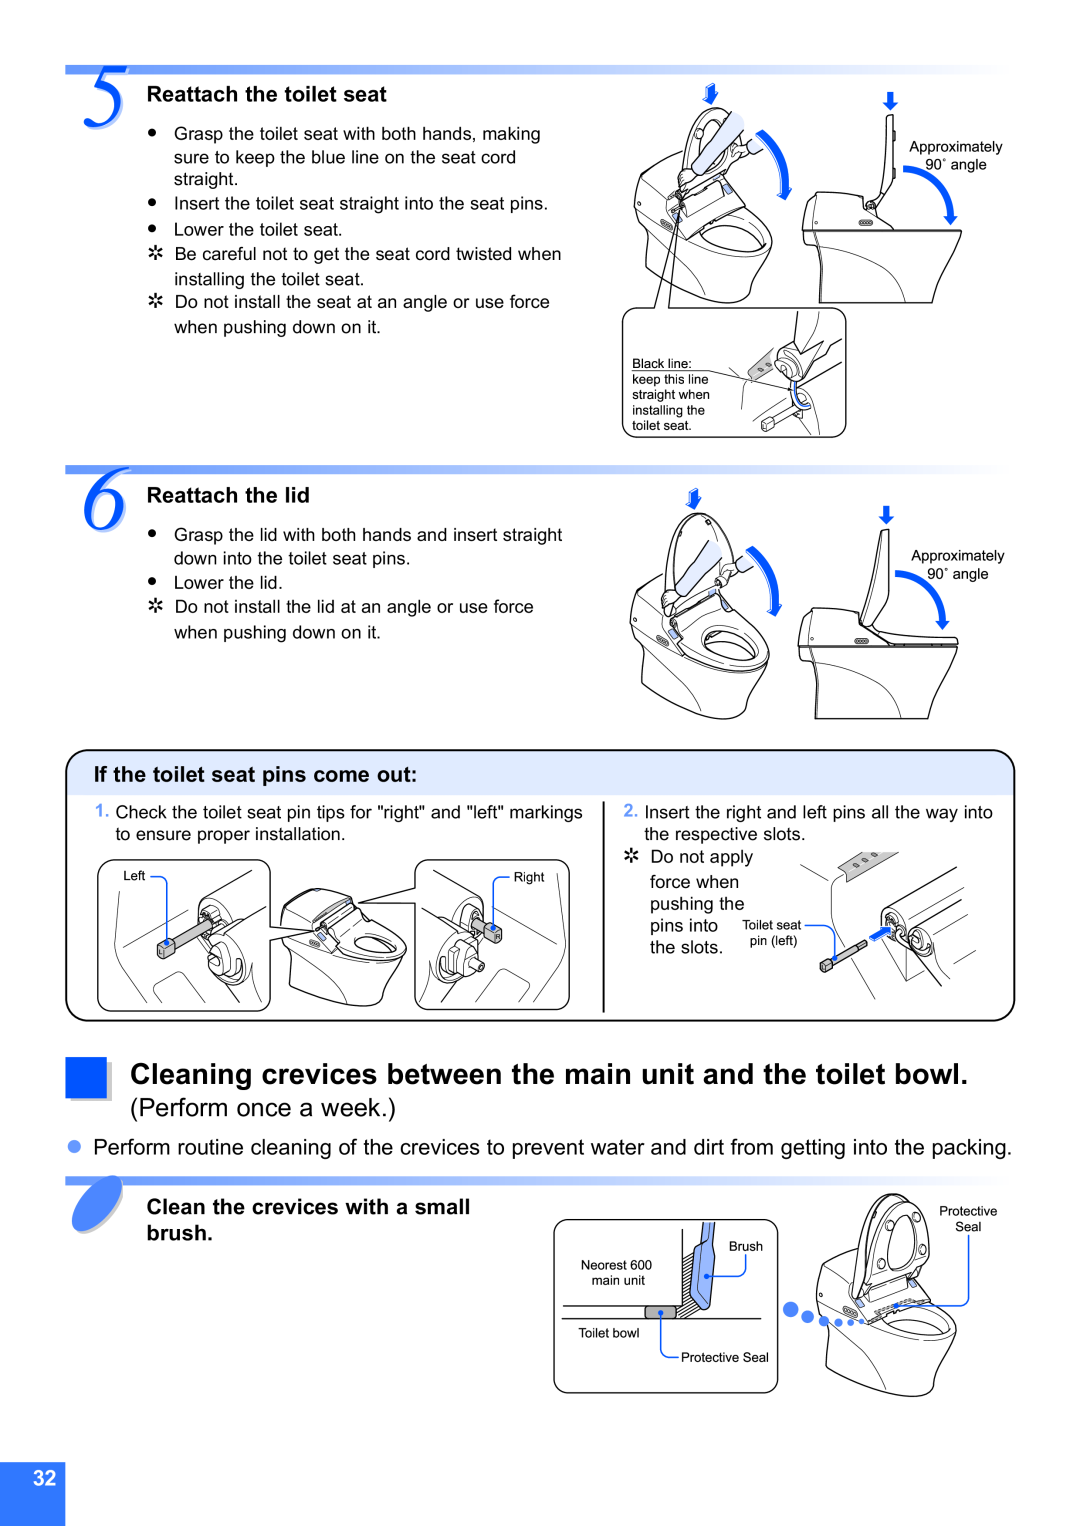 Toto MS990CG instruction manual Approximately90˚angle, Perform once a week, Reattach the toilet seat, Reattach the lid 